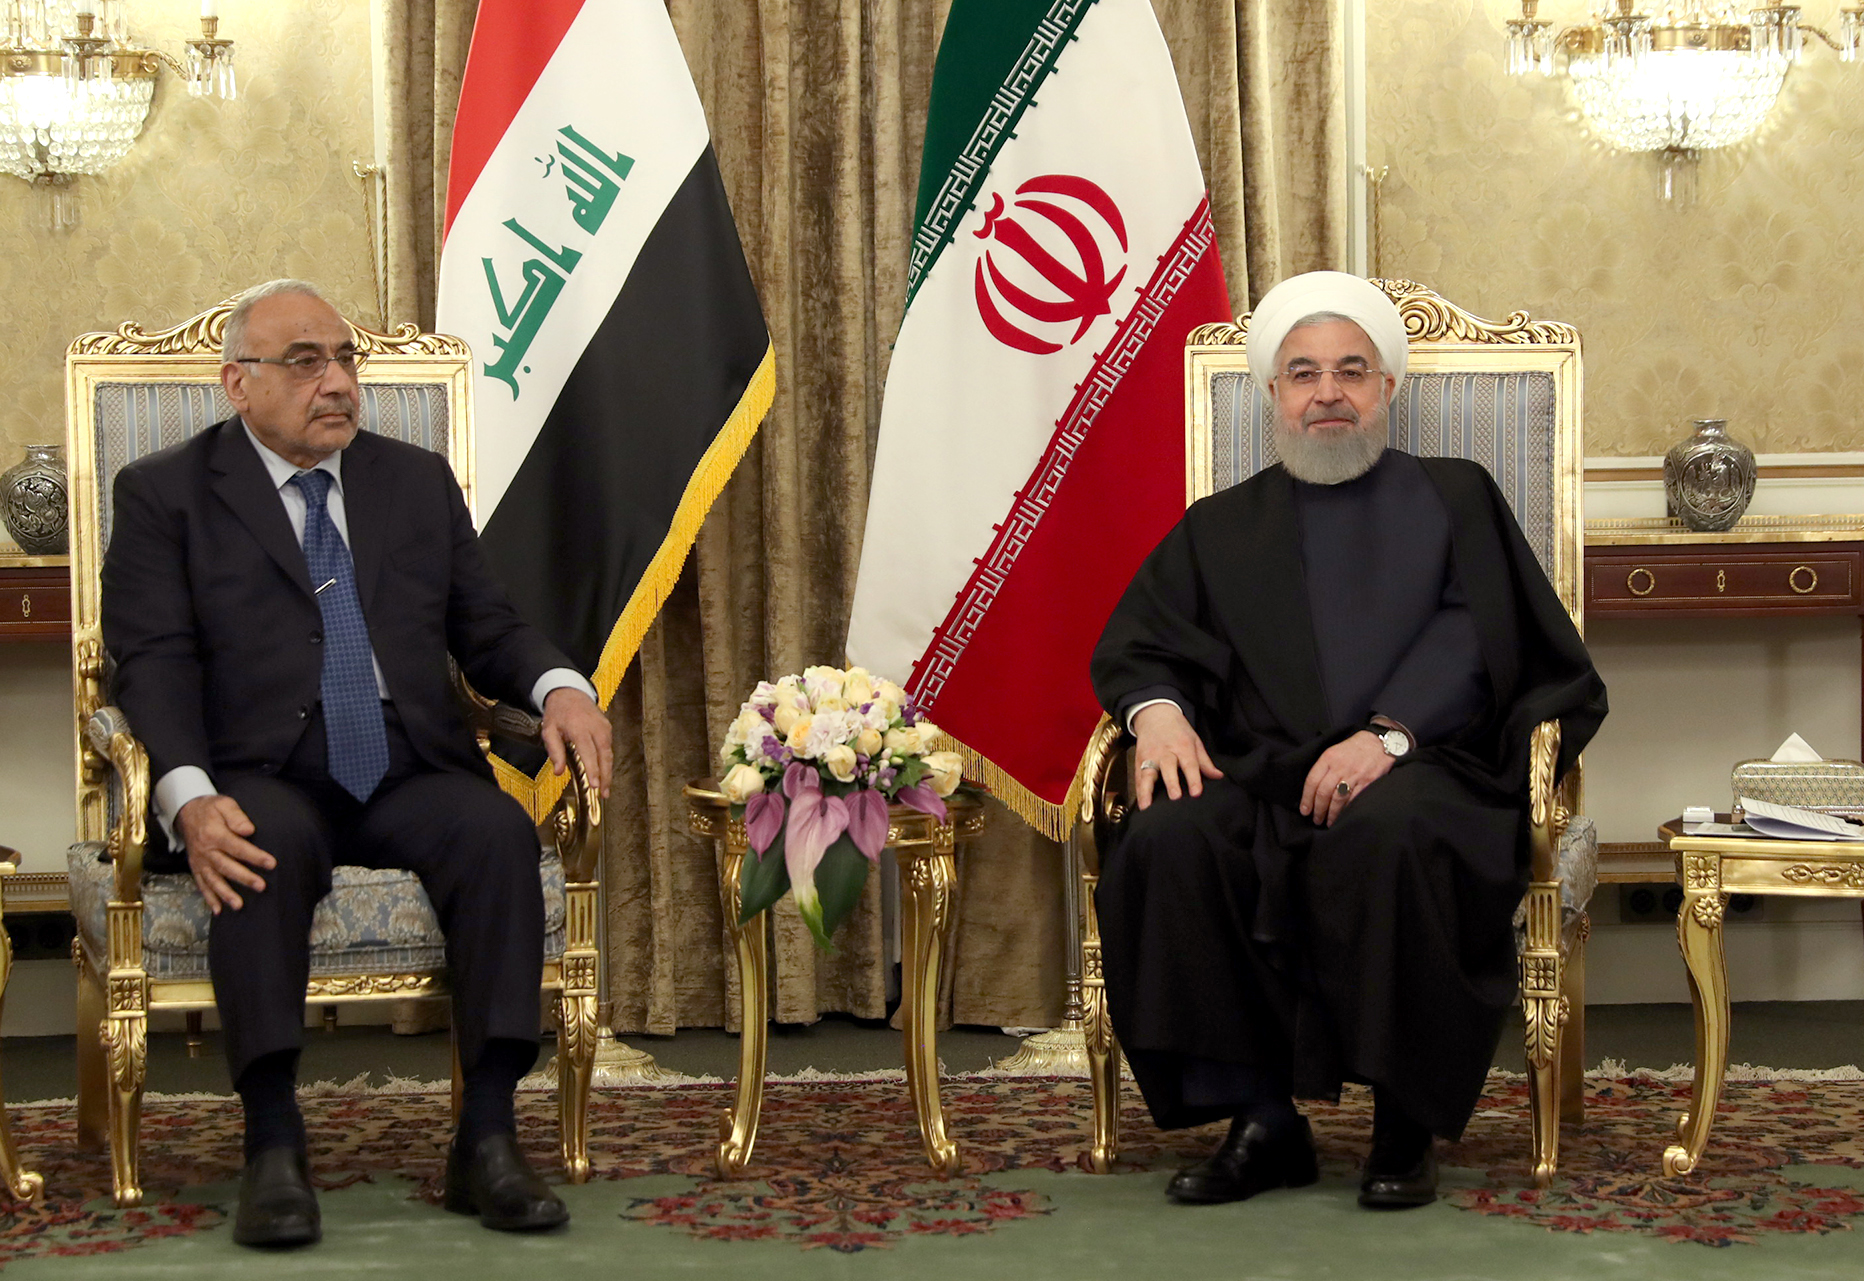 A handout picture provided by the Iranian presidency on April 6, 2019 shows Iranian President Hassan Rouhani (R) meeting with Iraqi Prime Minister Adel Abdel Mahdi in the Iranian capital Tehran (AFP)